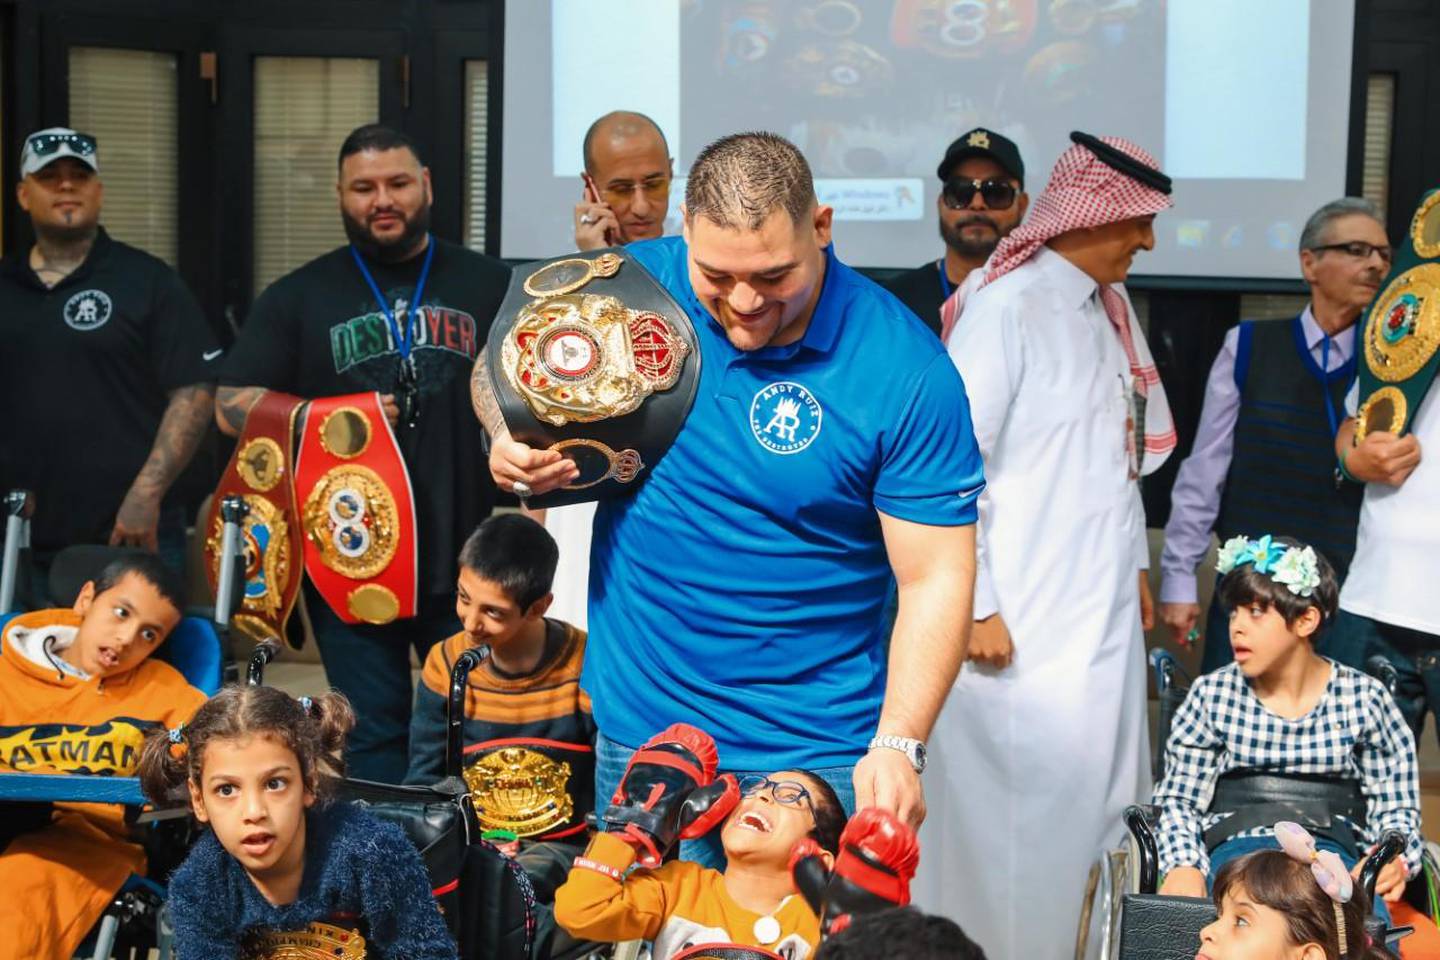 Andy Ruiz Jr during his schools visit ahead of his fight with Anthony Joshua. Courtesy Diriyah Season